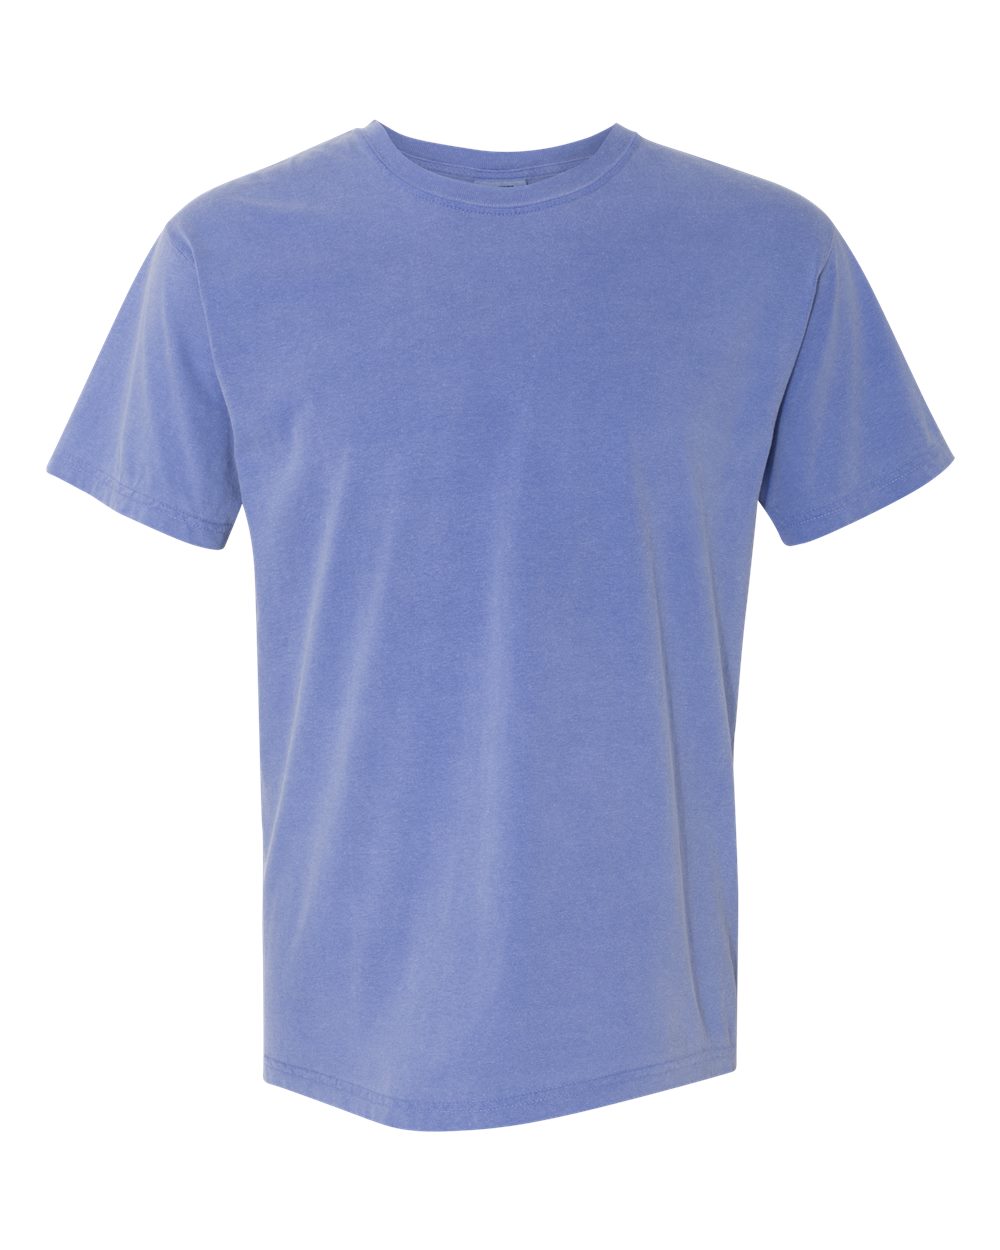 Comfort Colors Garment-Dyed Tee (1717) in Periwinkle